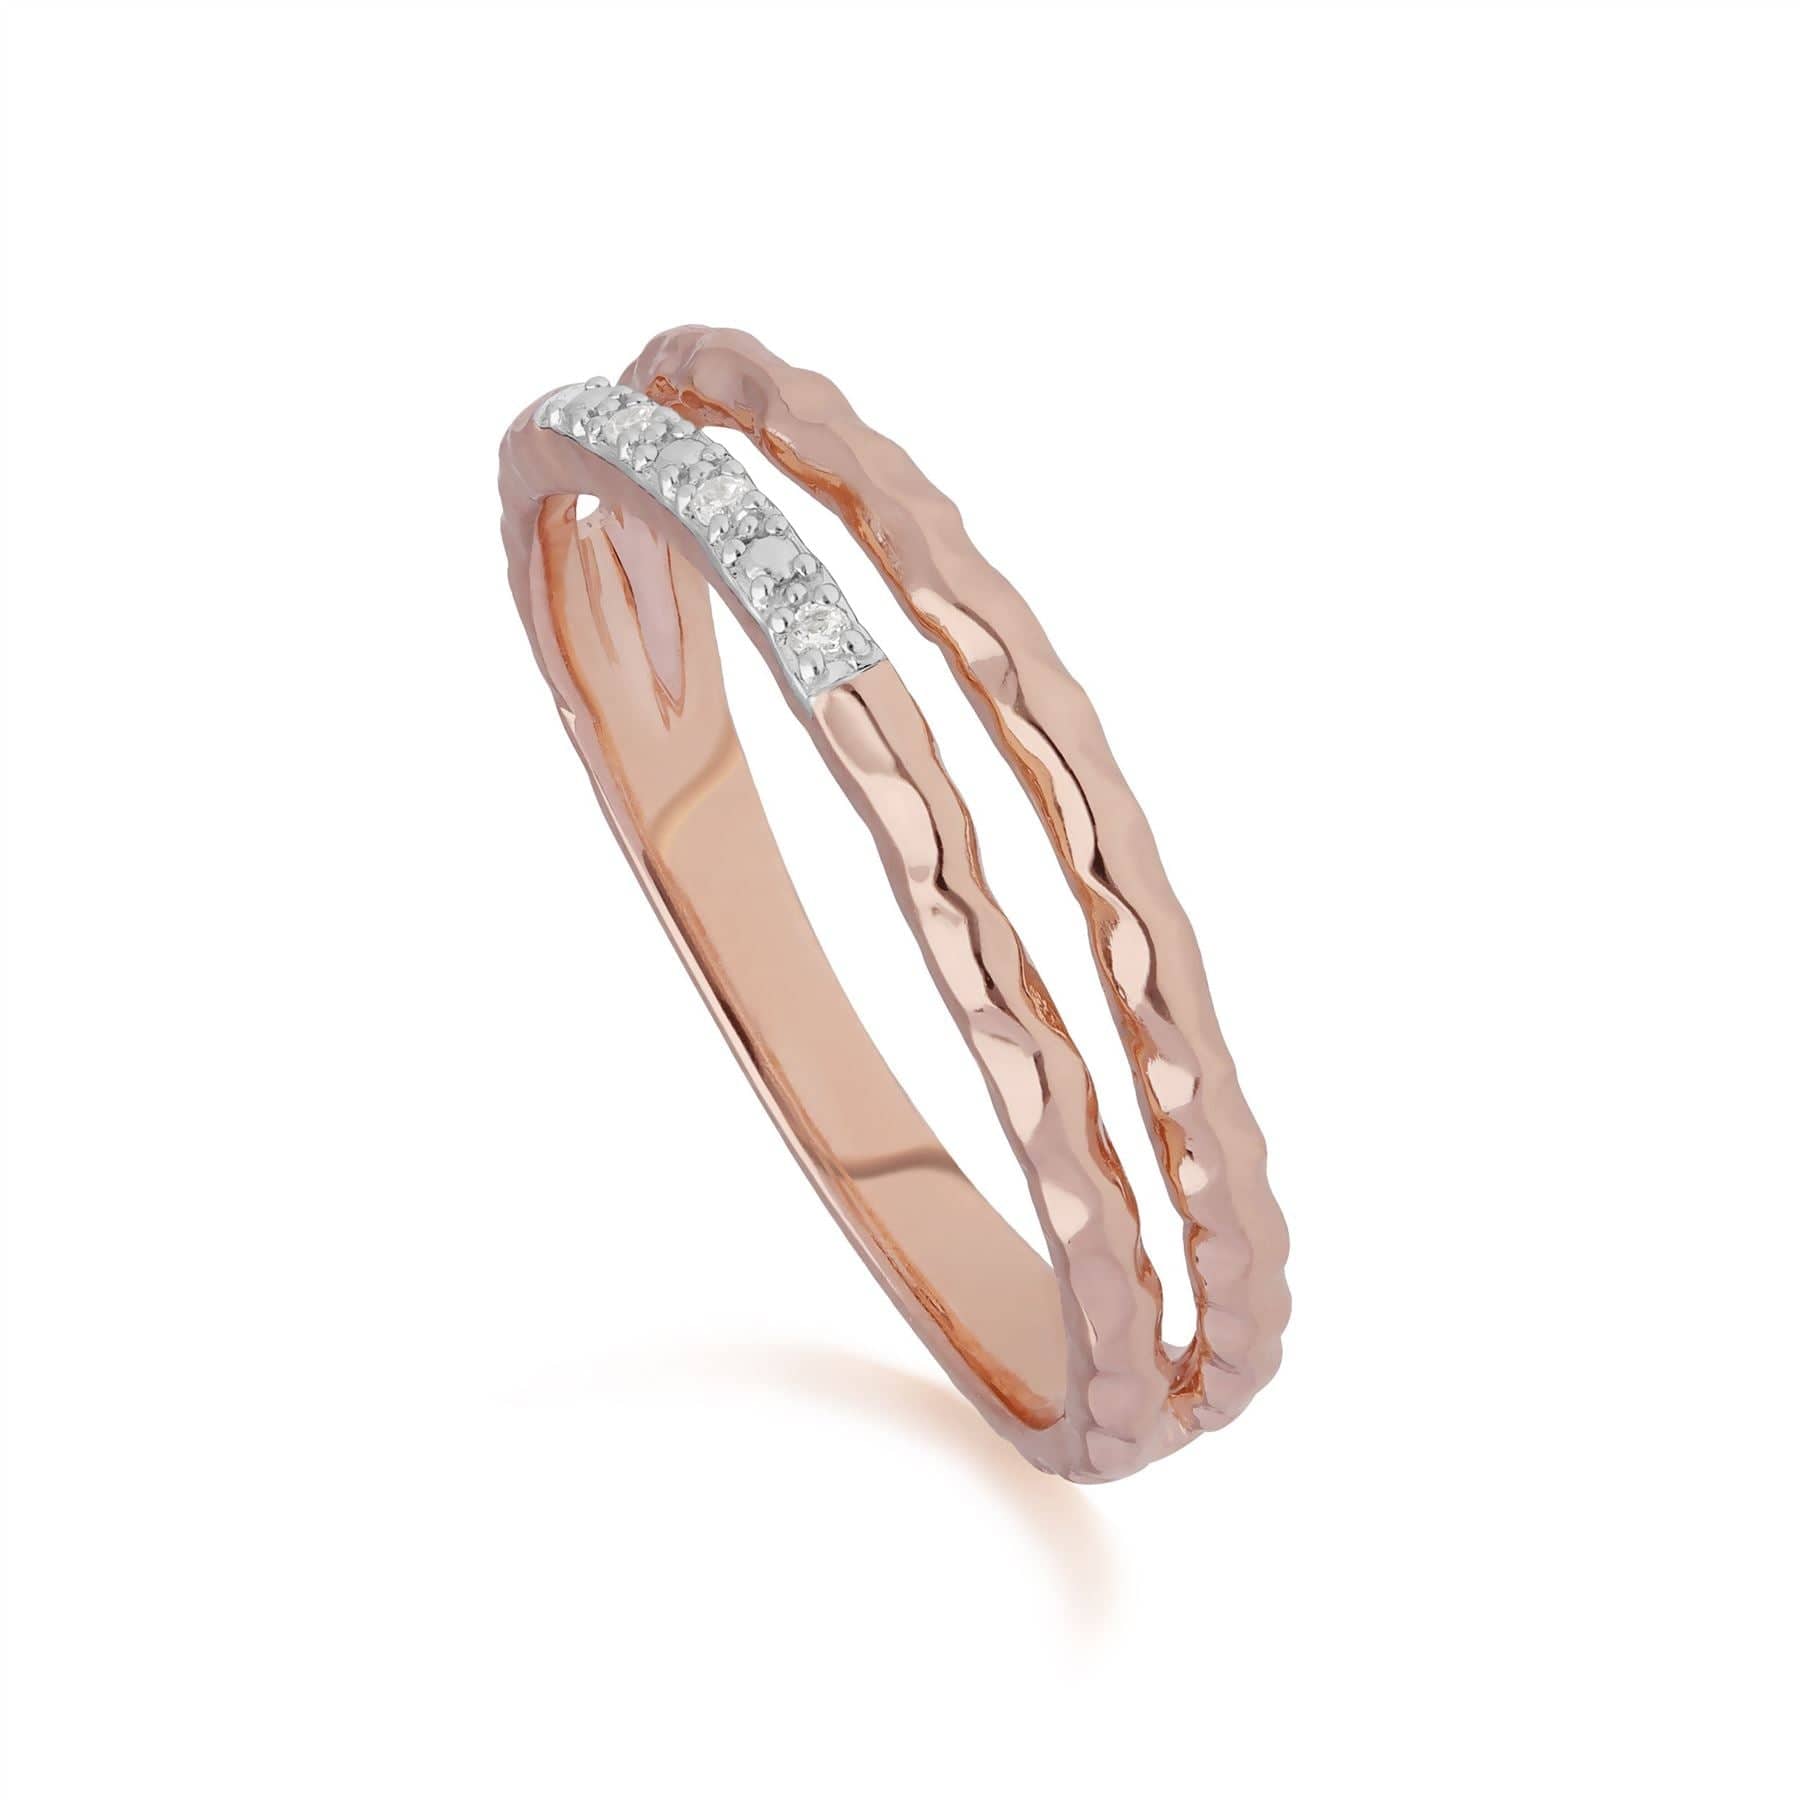 191R0900029 Diamond Pavé Double Ring Band in 9ct Rose Gold 1